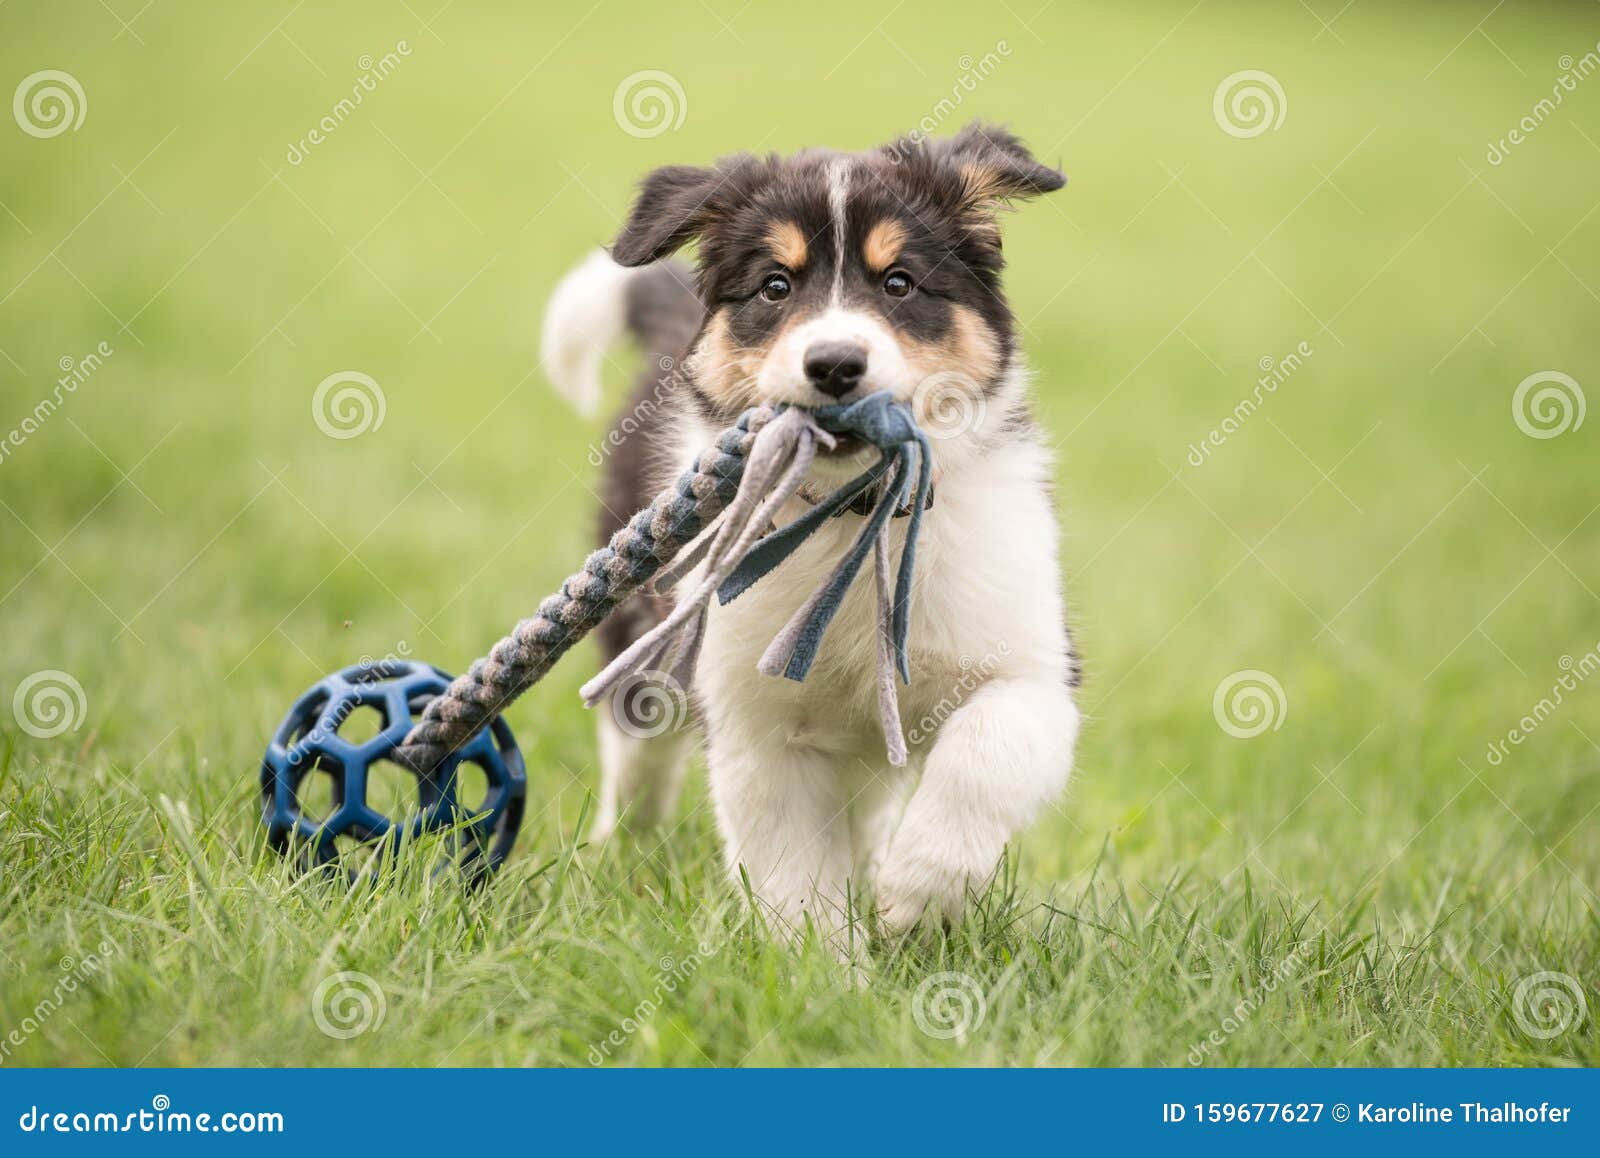 Cute Border Collie Dog Puppy Runs Happily with a Toy and Plays Stock ...